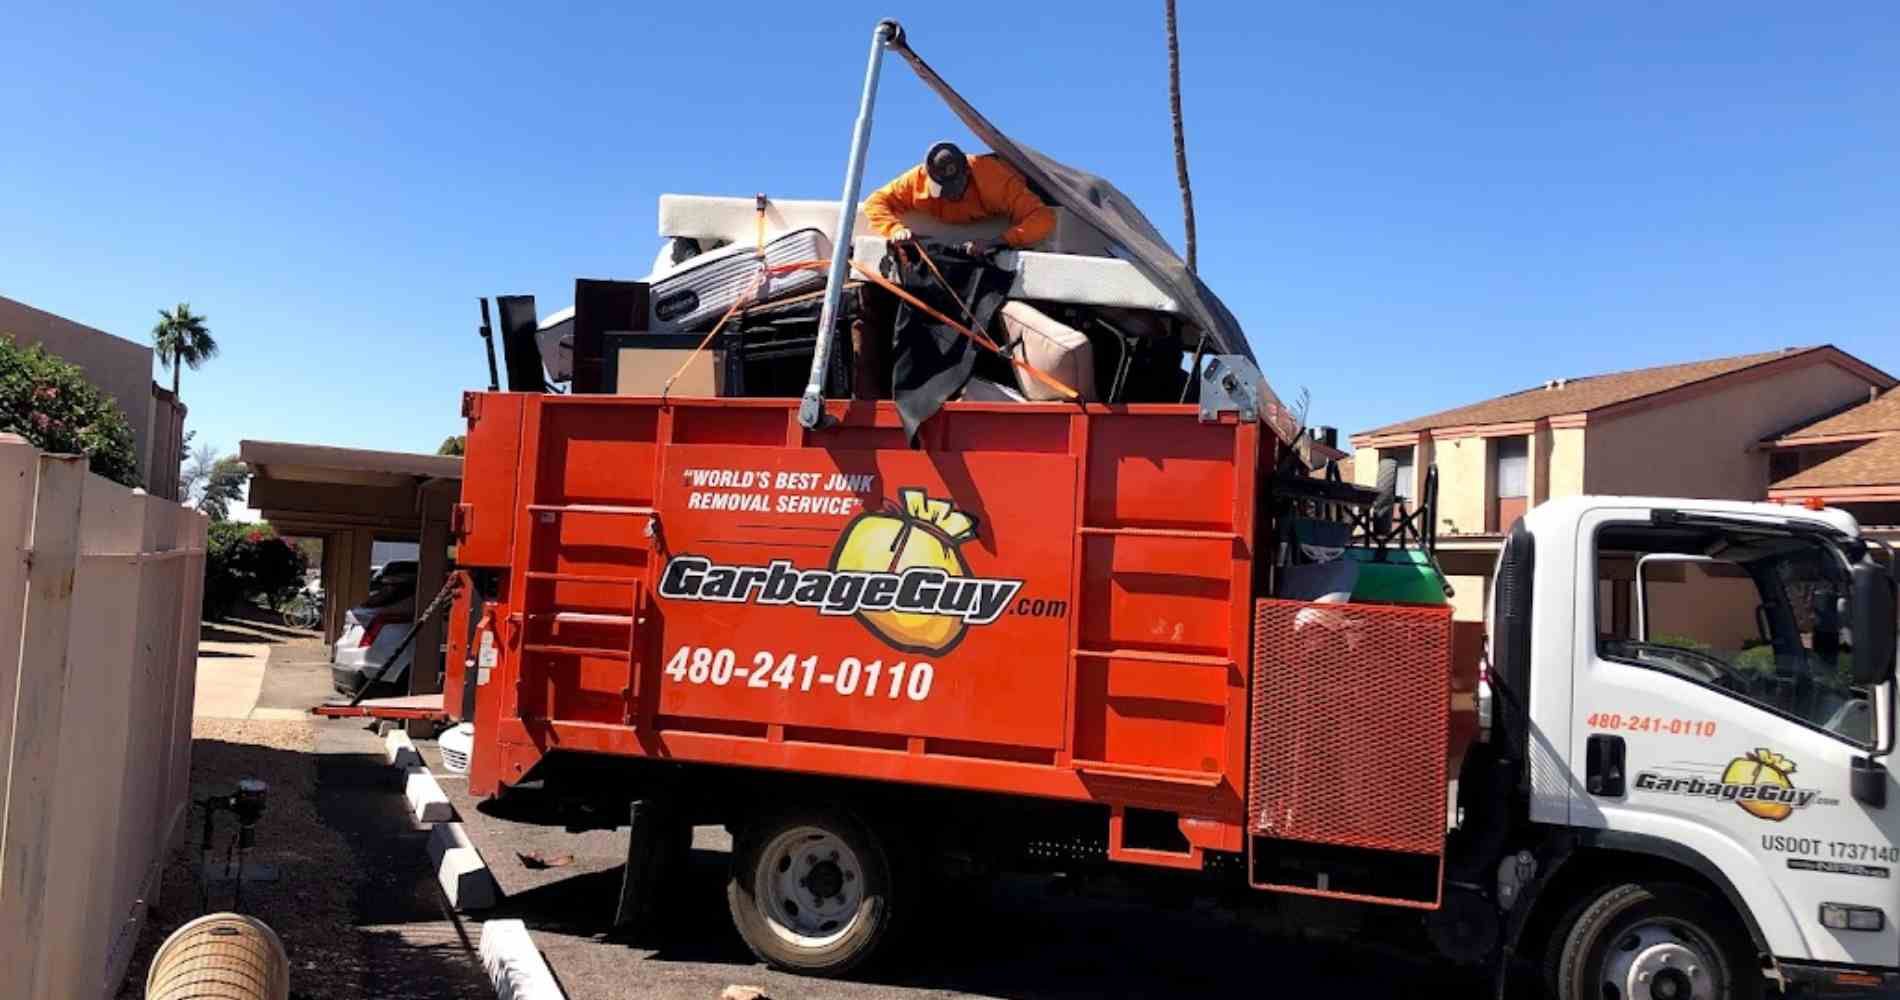 #1 for Furniture Removal in Scottsdale, AZ With Over 1200 5-Star Reviews!